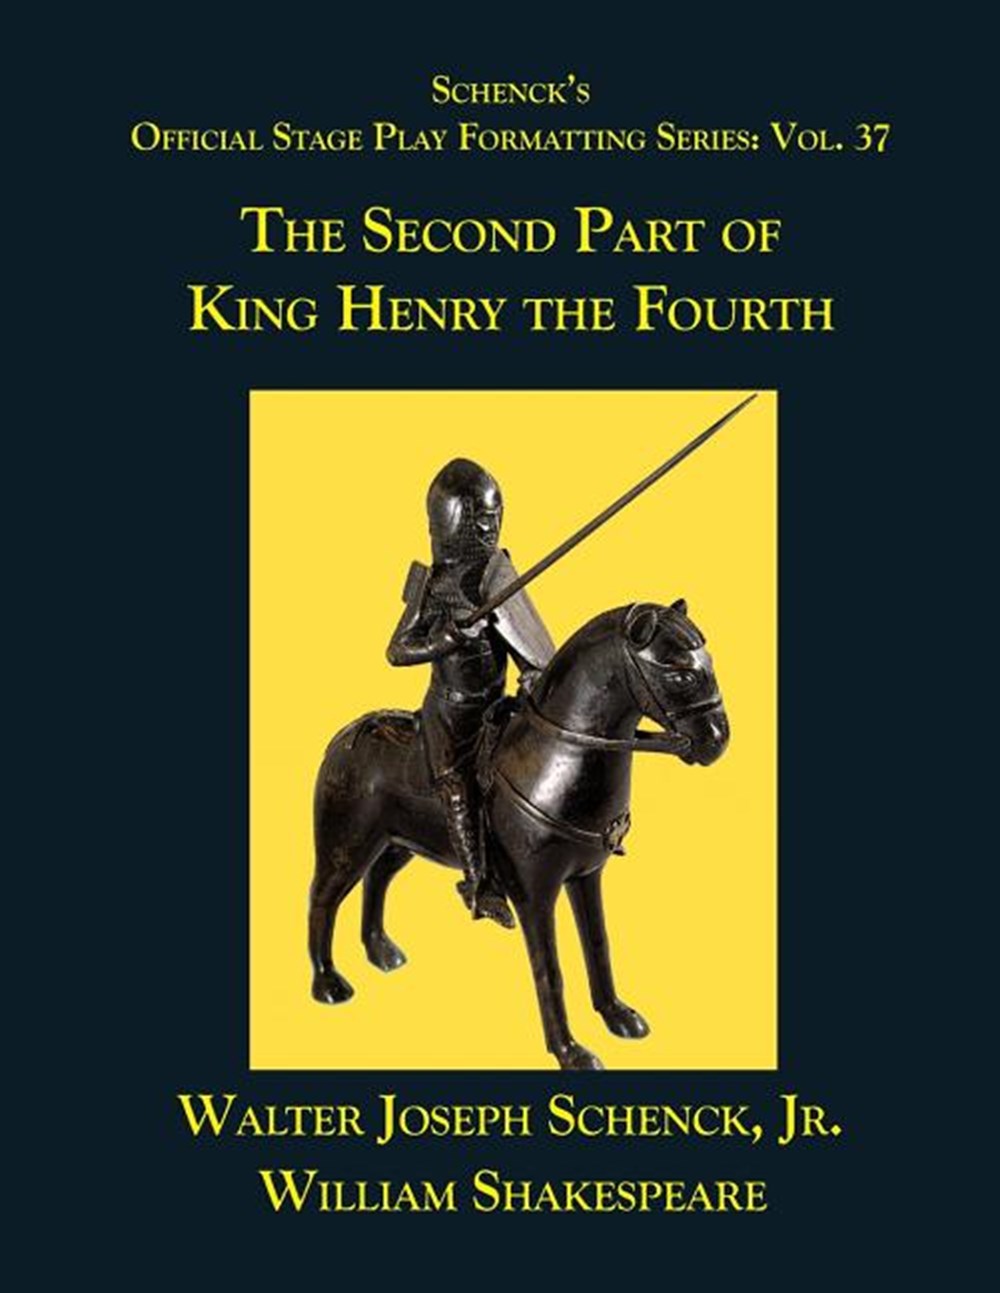 Schenck's Official Stage Play Formatting Series: Vol. 37 - The Second Part of King Henry the Fourth